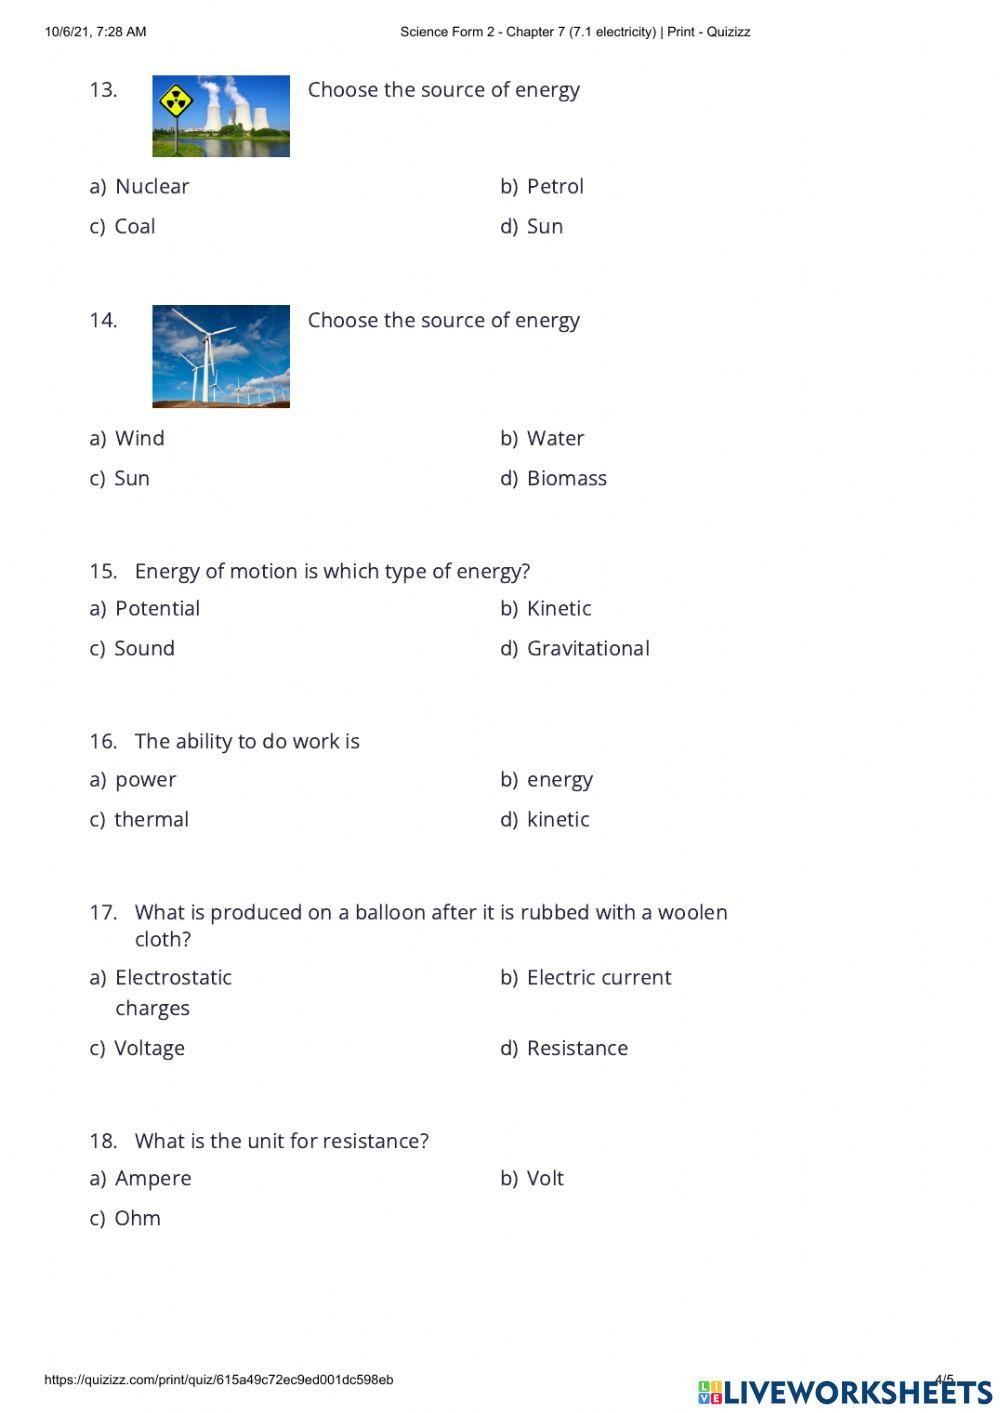 Chapter 7 (science form 2)